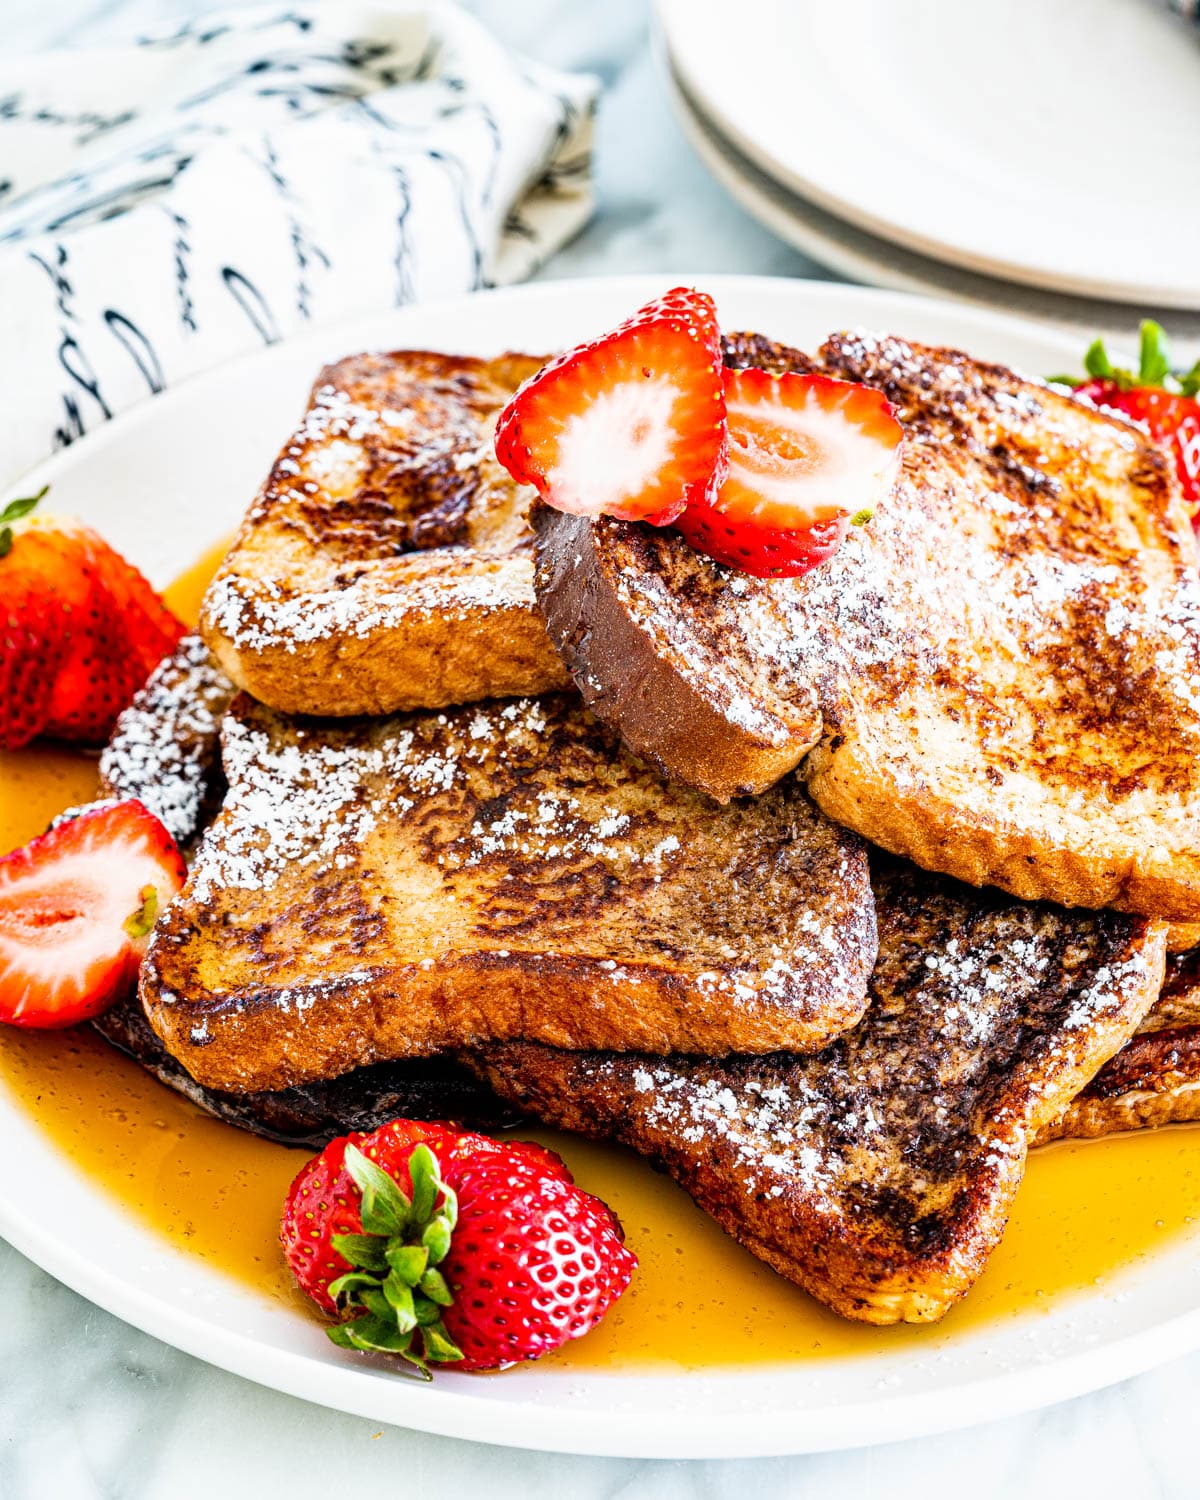 french toast drizzled with maple syrup and garnished with strawberries